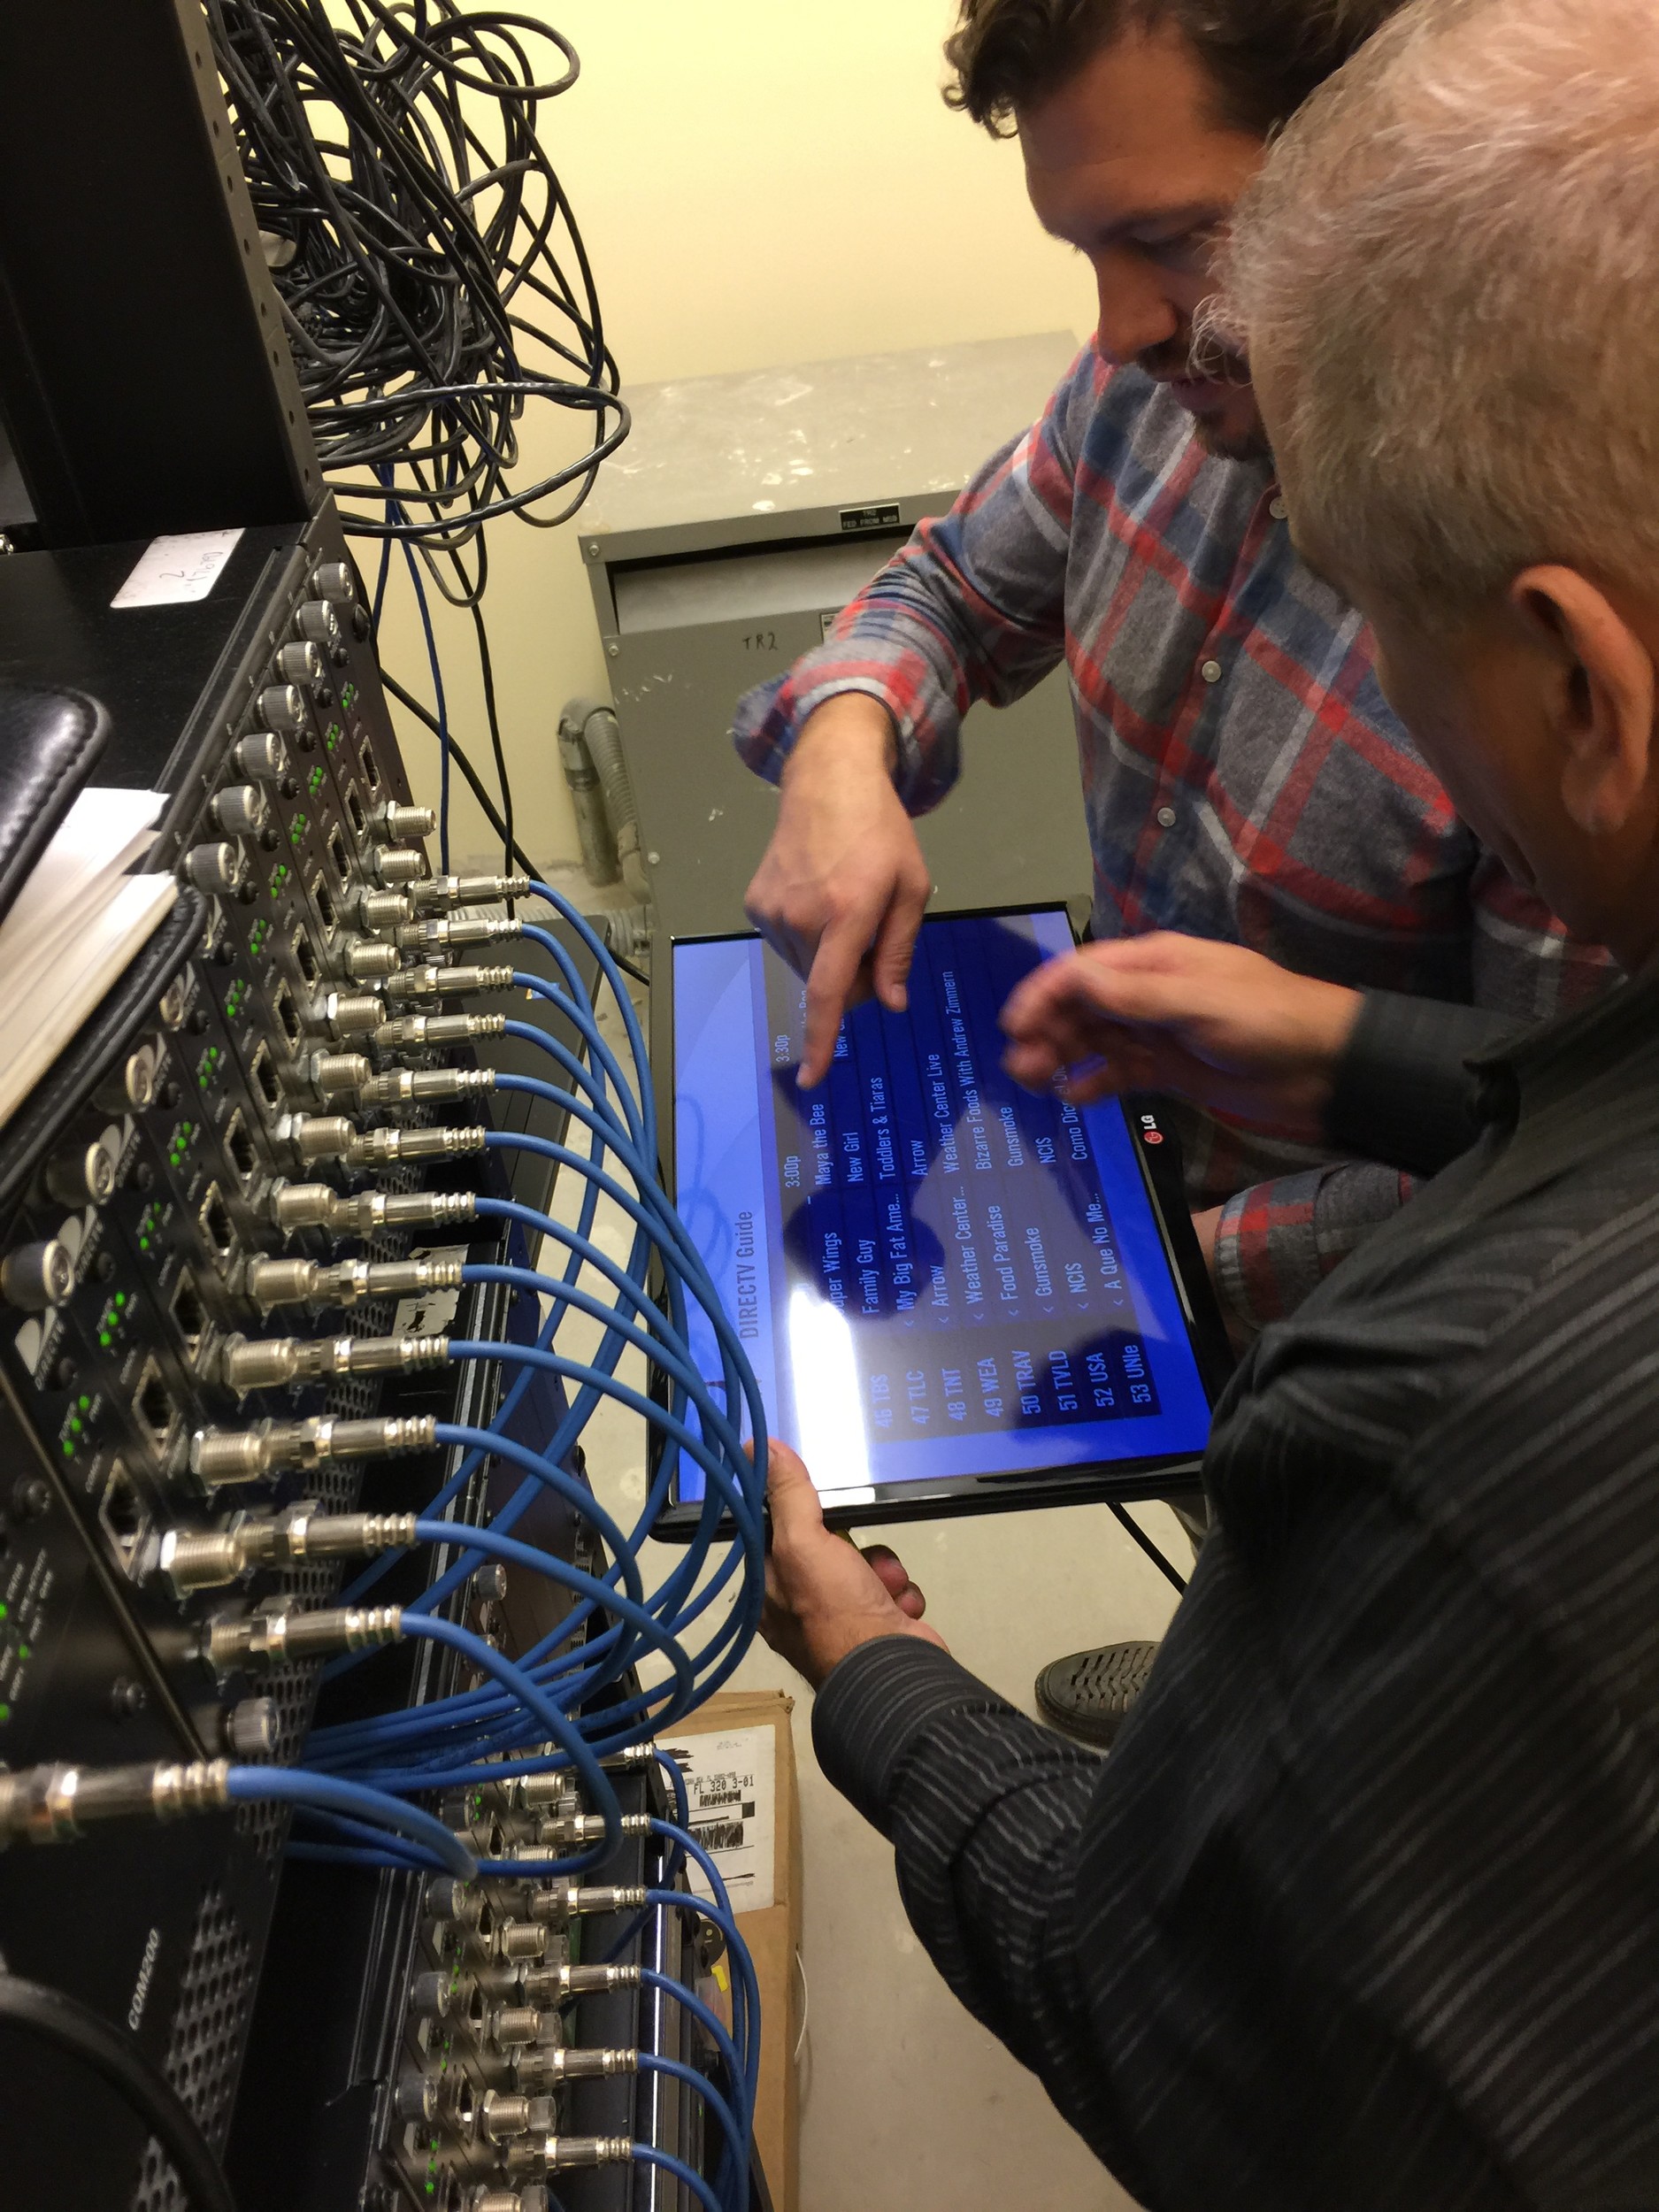 MDM employees work on the DirecTV headend that was donated to Ronald McDonald House in Jacksonville.